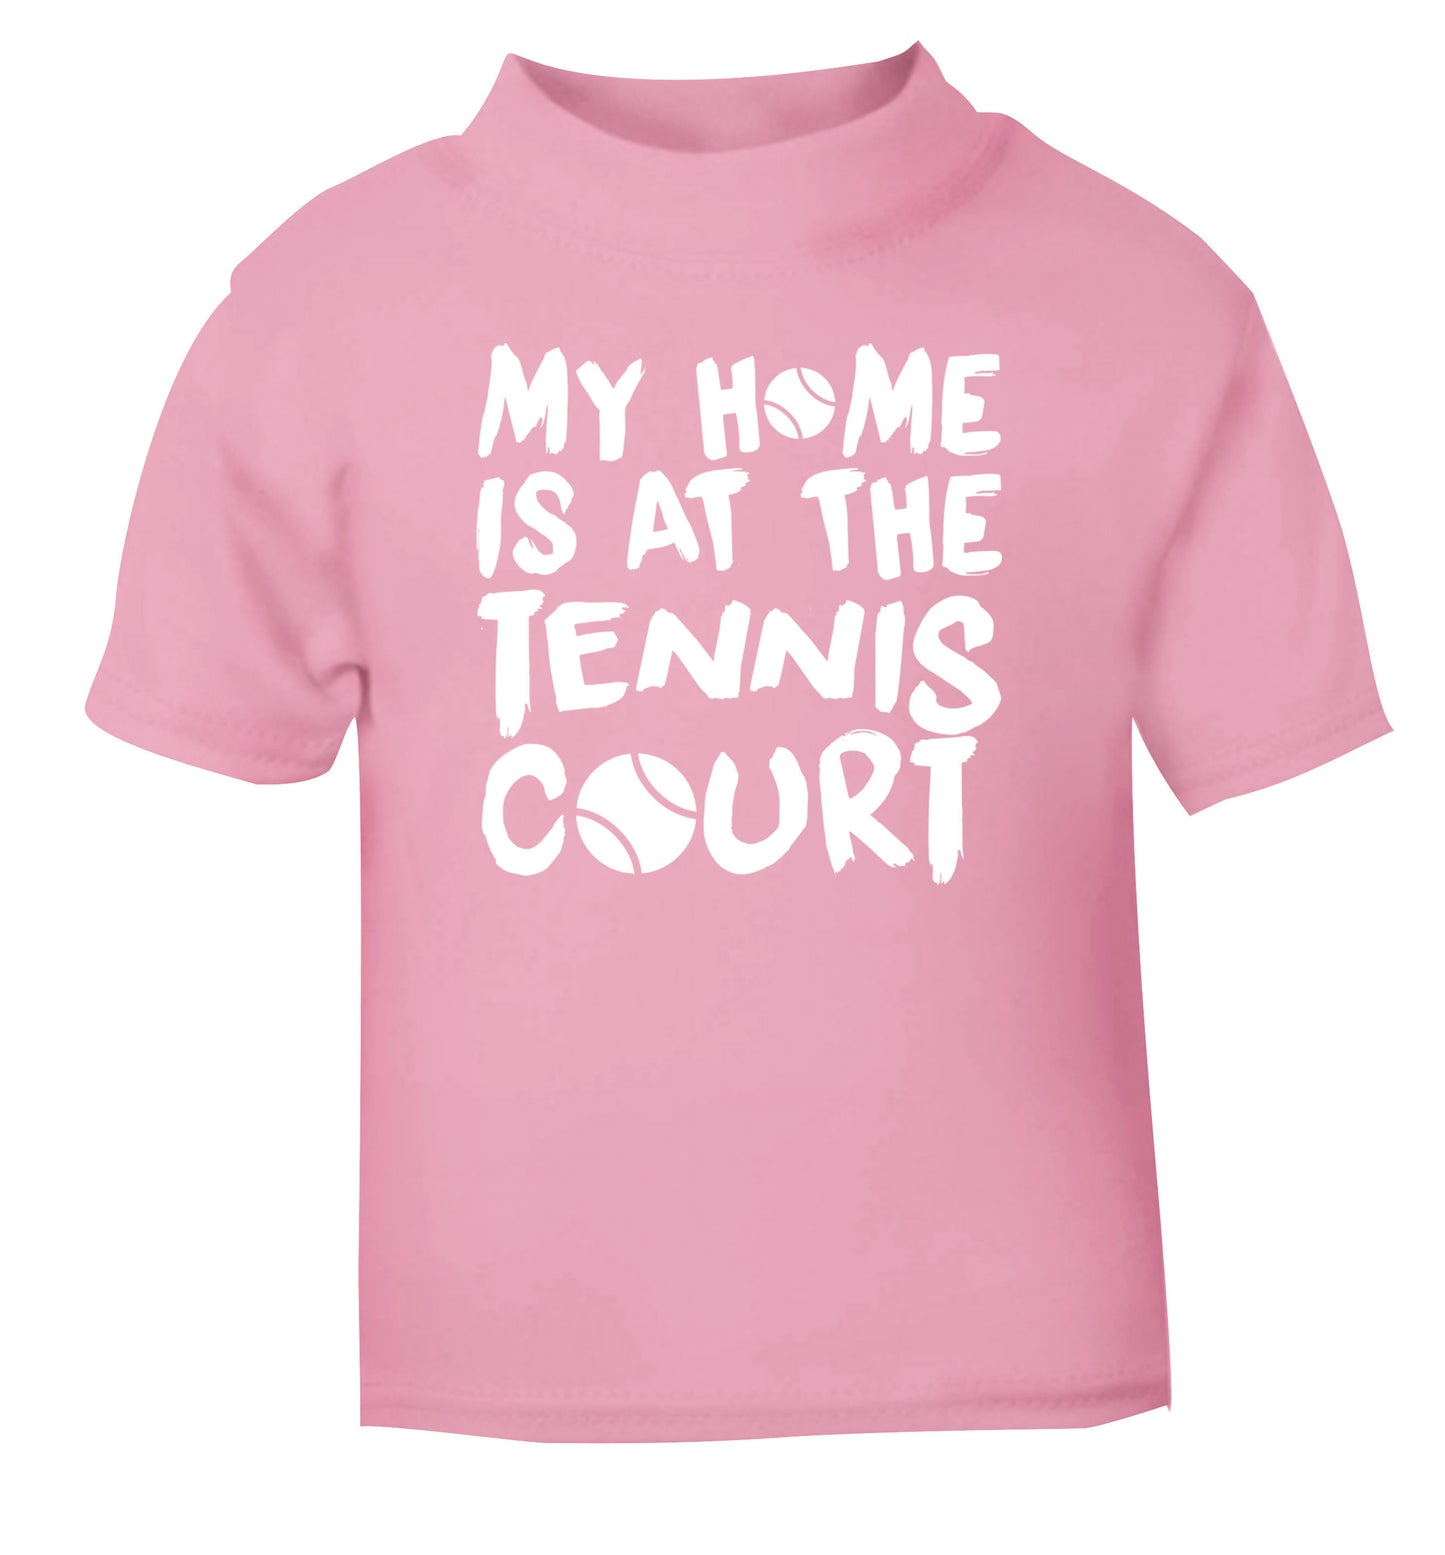 My home is at the tennis court light pink Baby Toddler Tshirt 2 Years